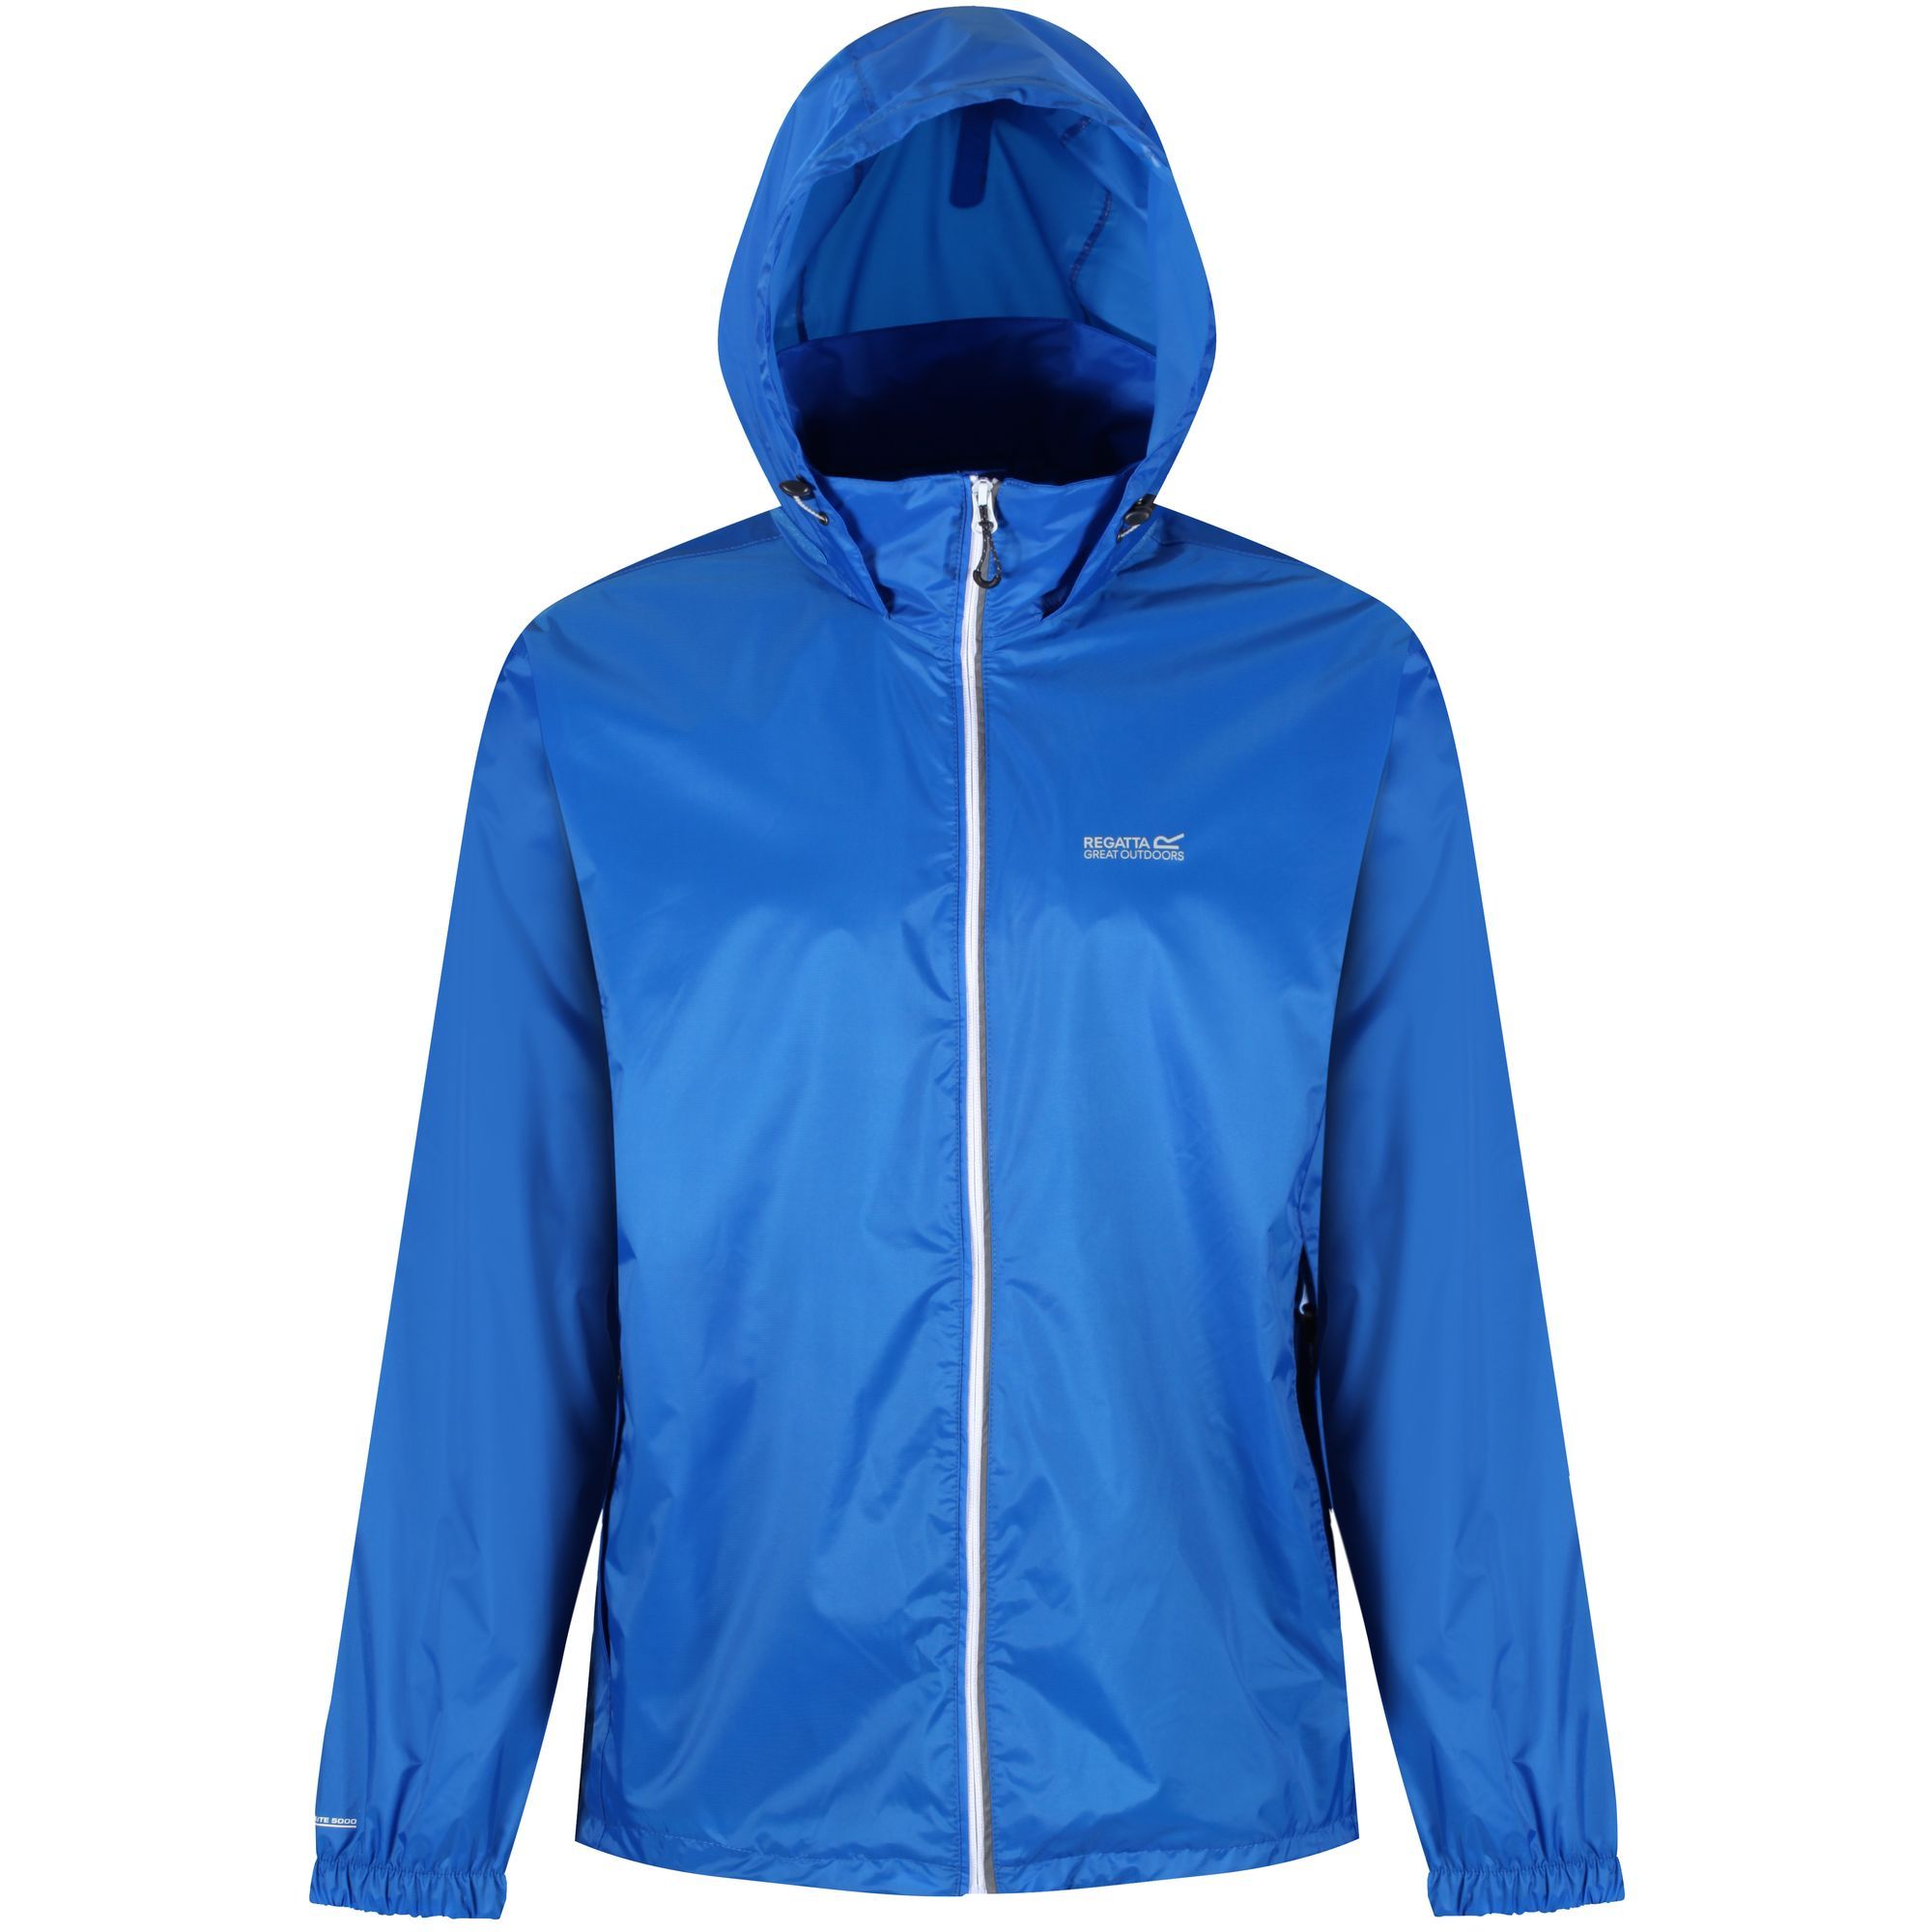 100% Polyamide. Waterproof hooded jacket with elasticated cuffs. Ideal for wet weather. Hand wash.